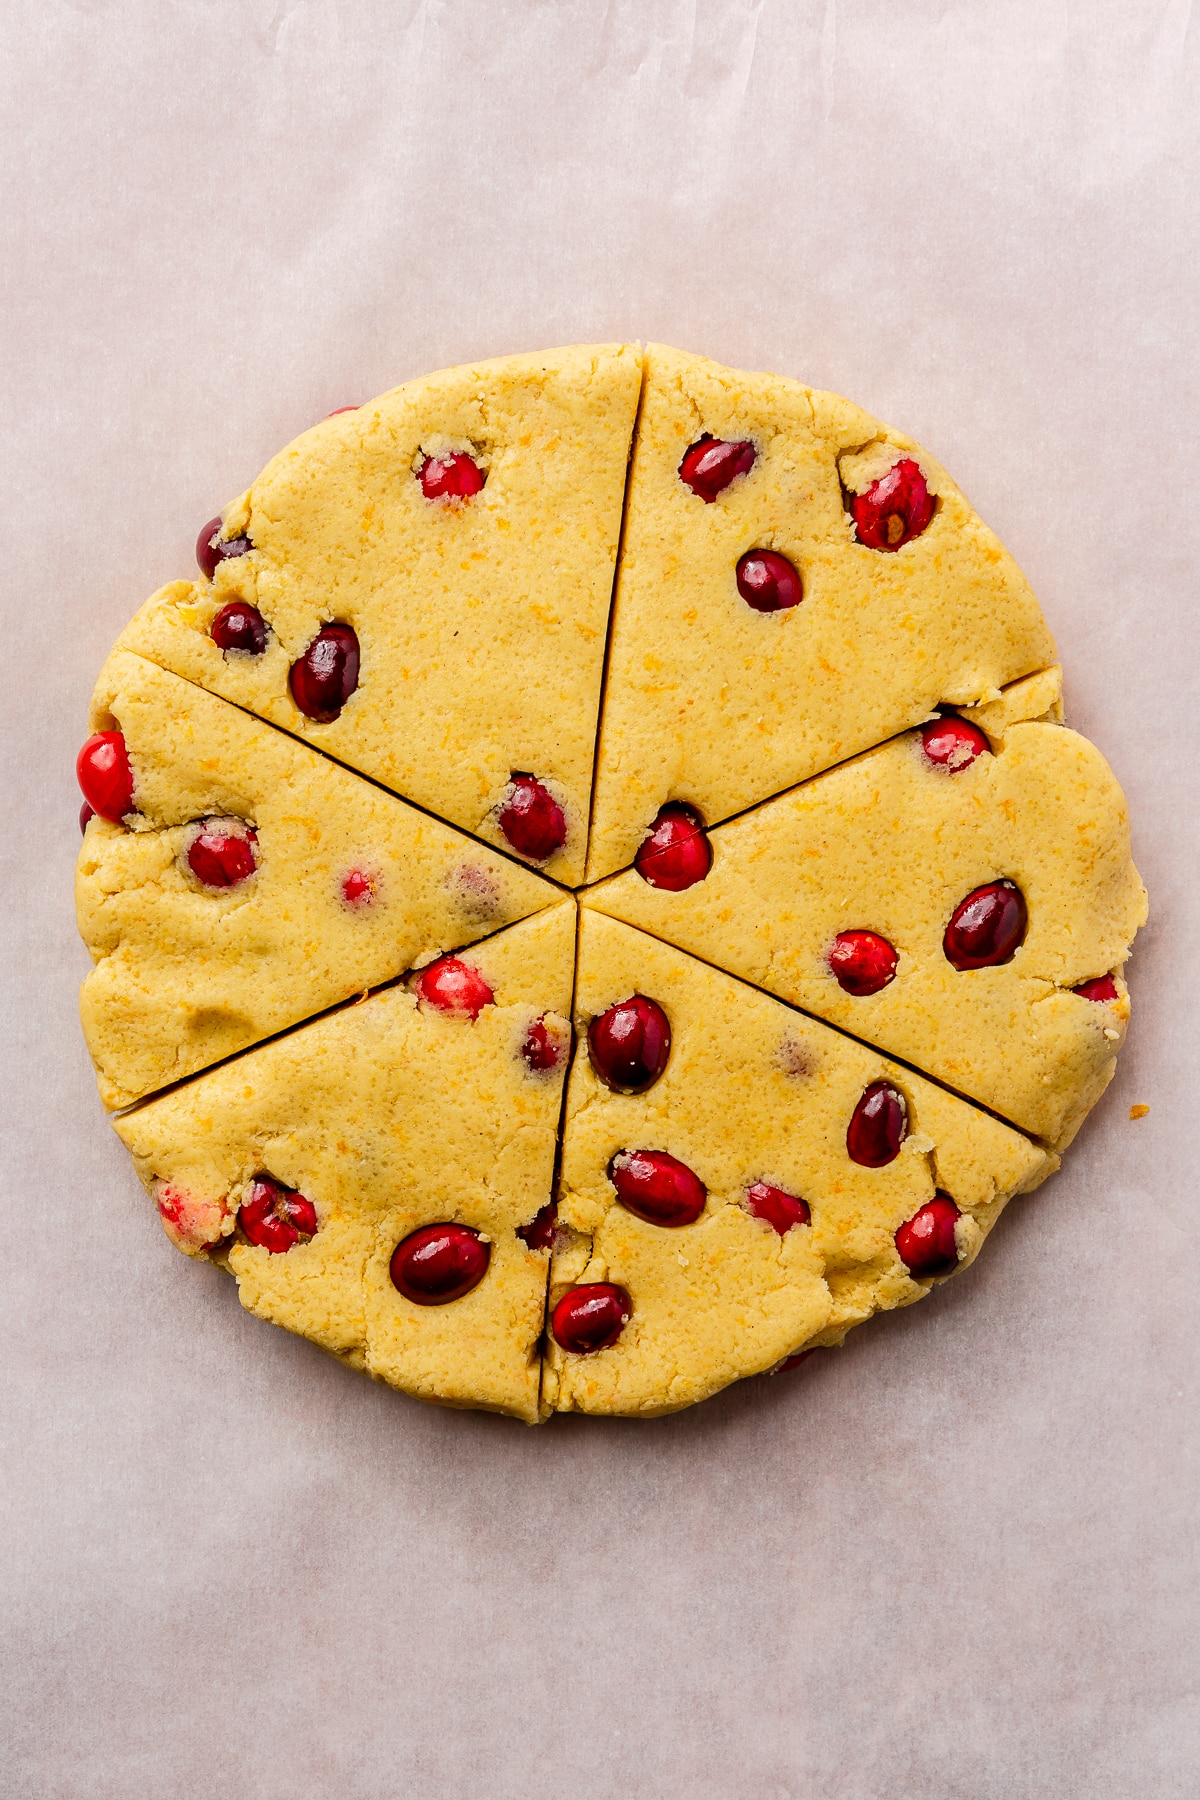 The cranberry, dough mixture has been flattened and formed into a circle shape which has been sliced into six pieces, pizza style.